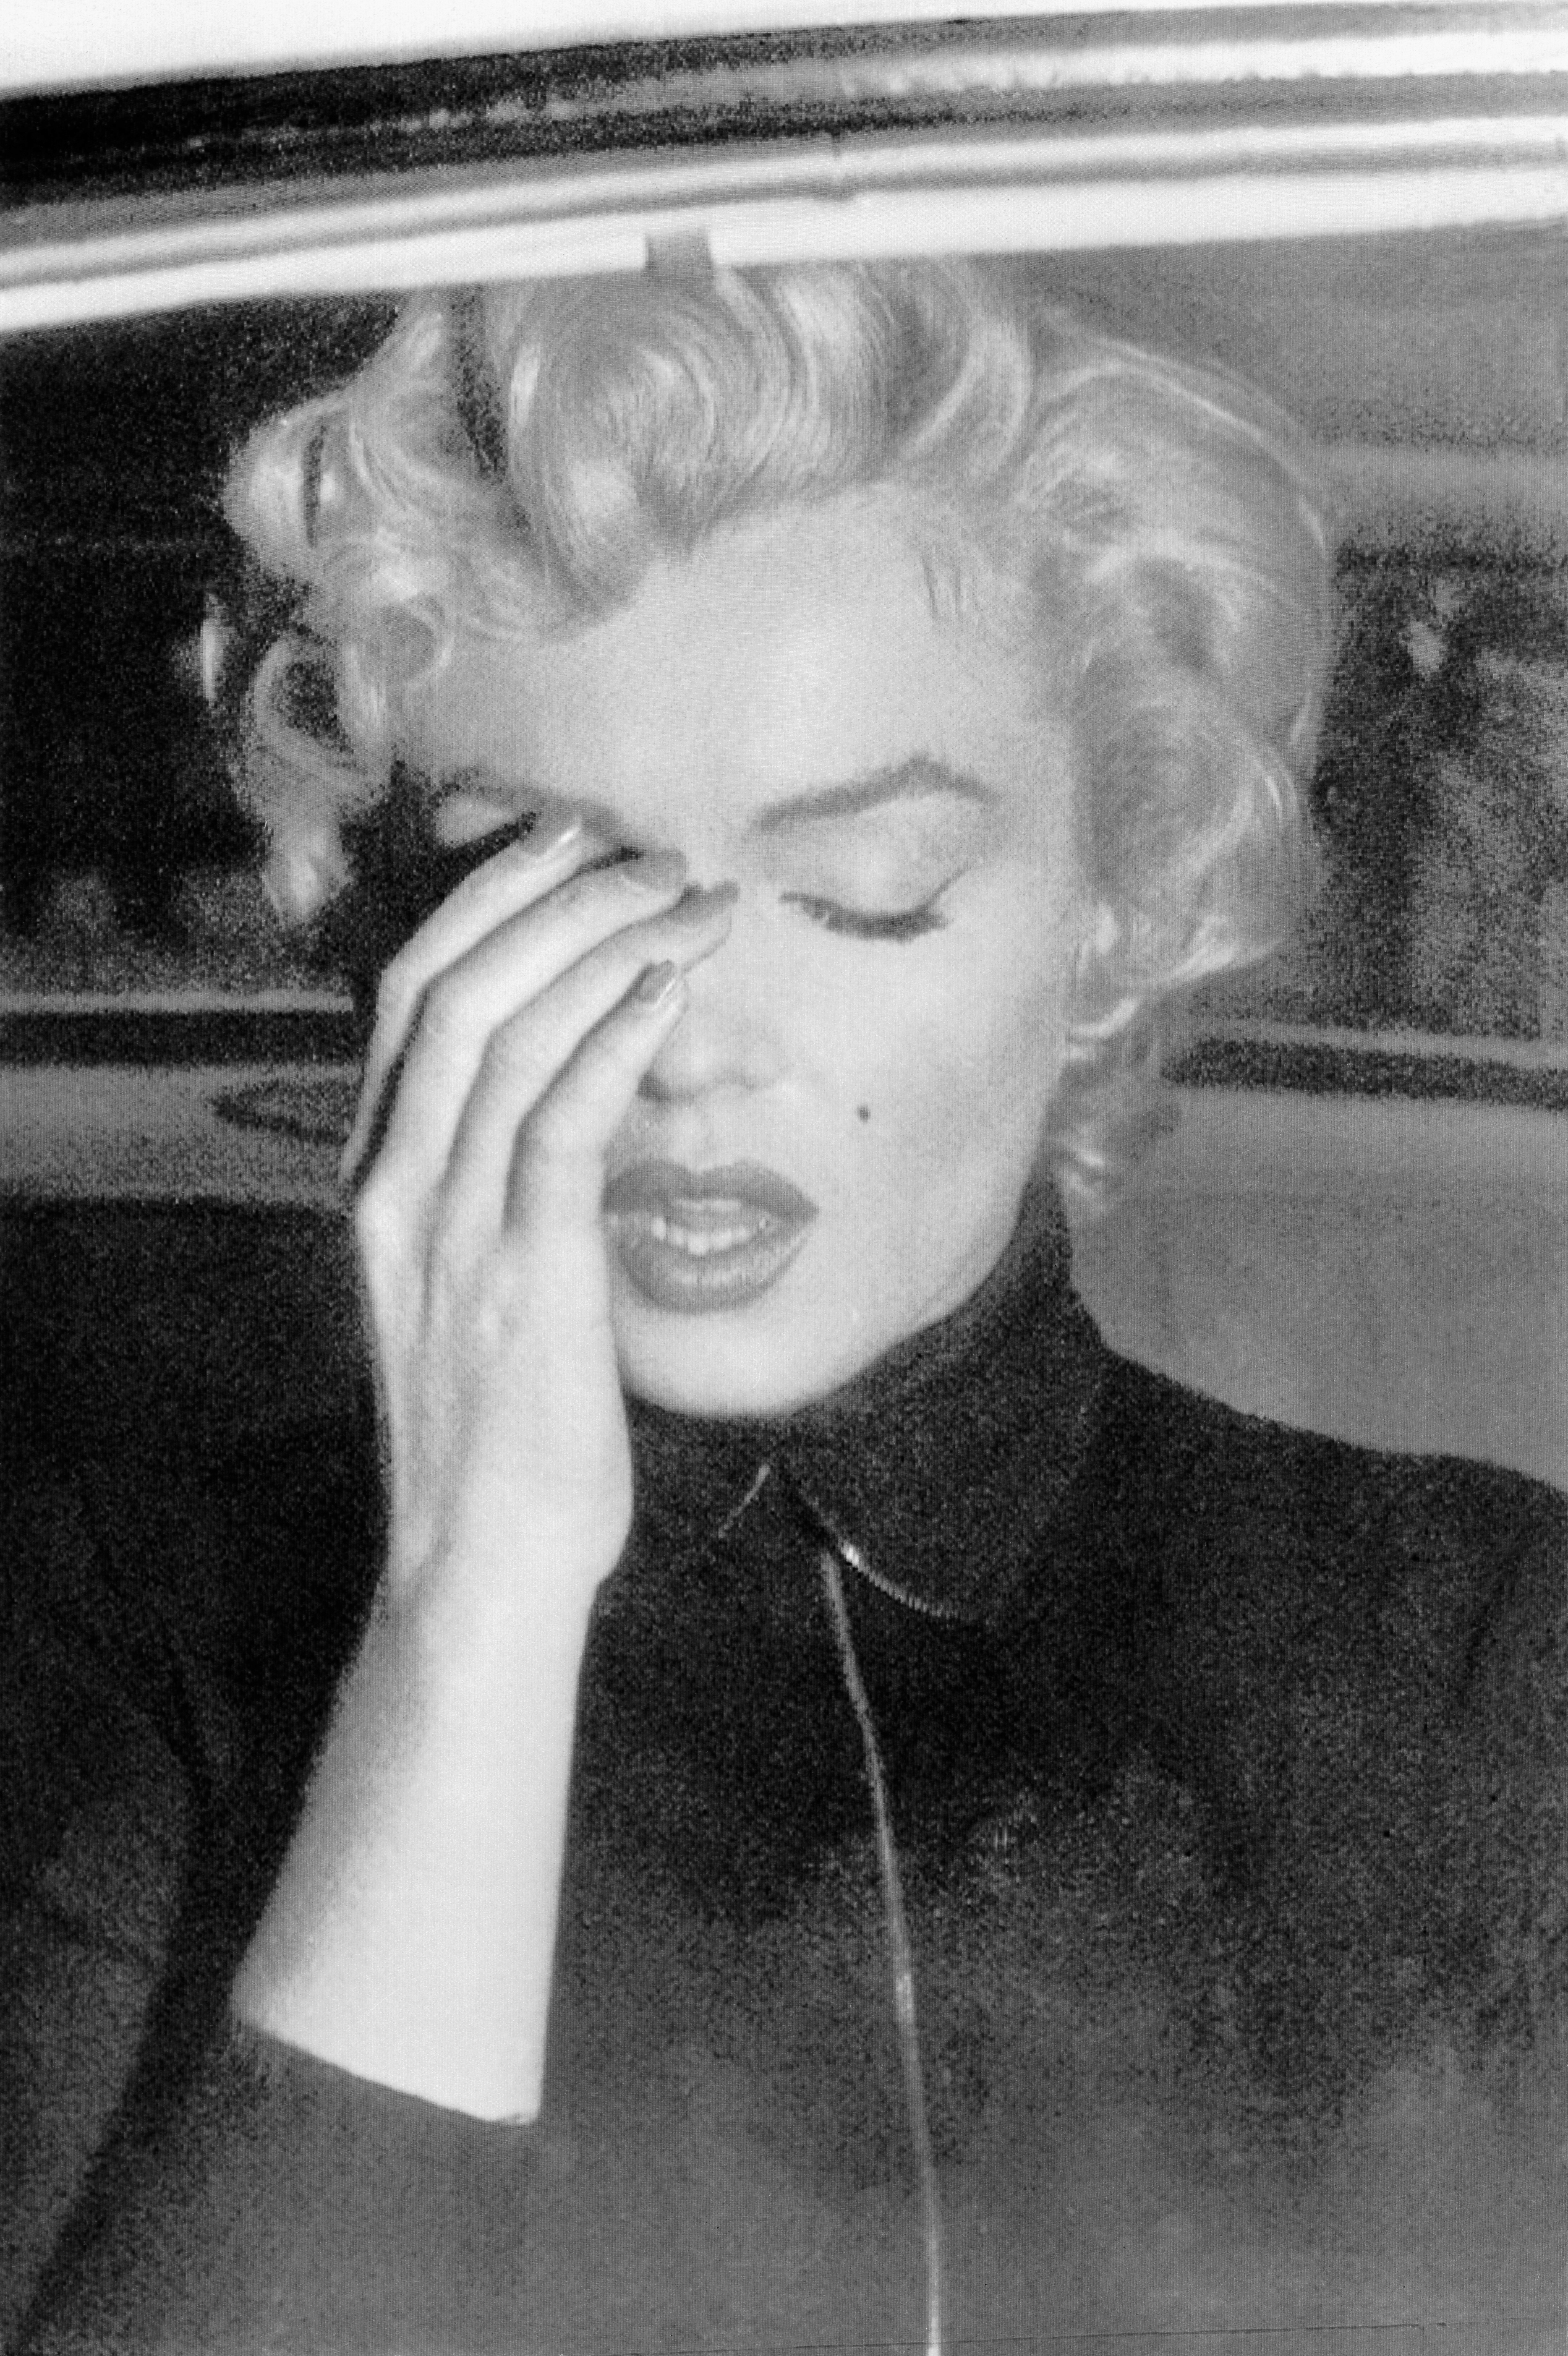 Marilyn Monroe seen crying in a car in Beverly Hills, California in 1954. | Source: Getty Images